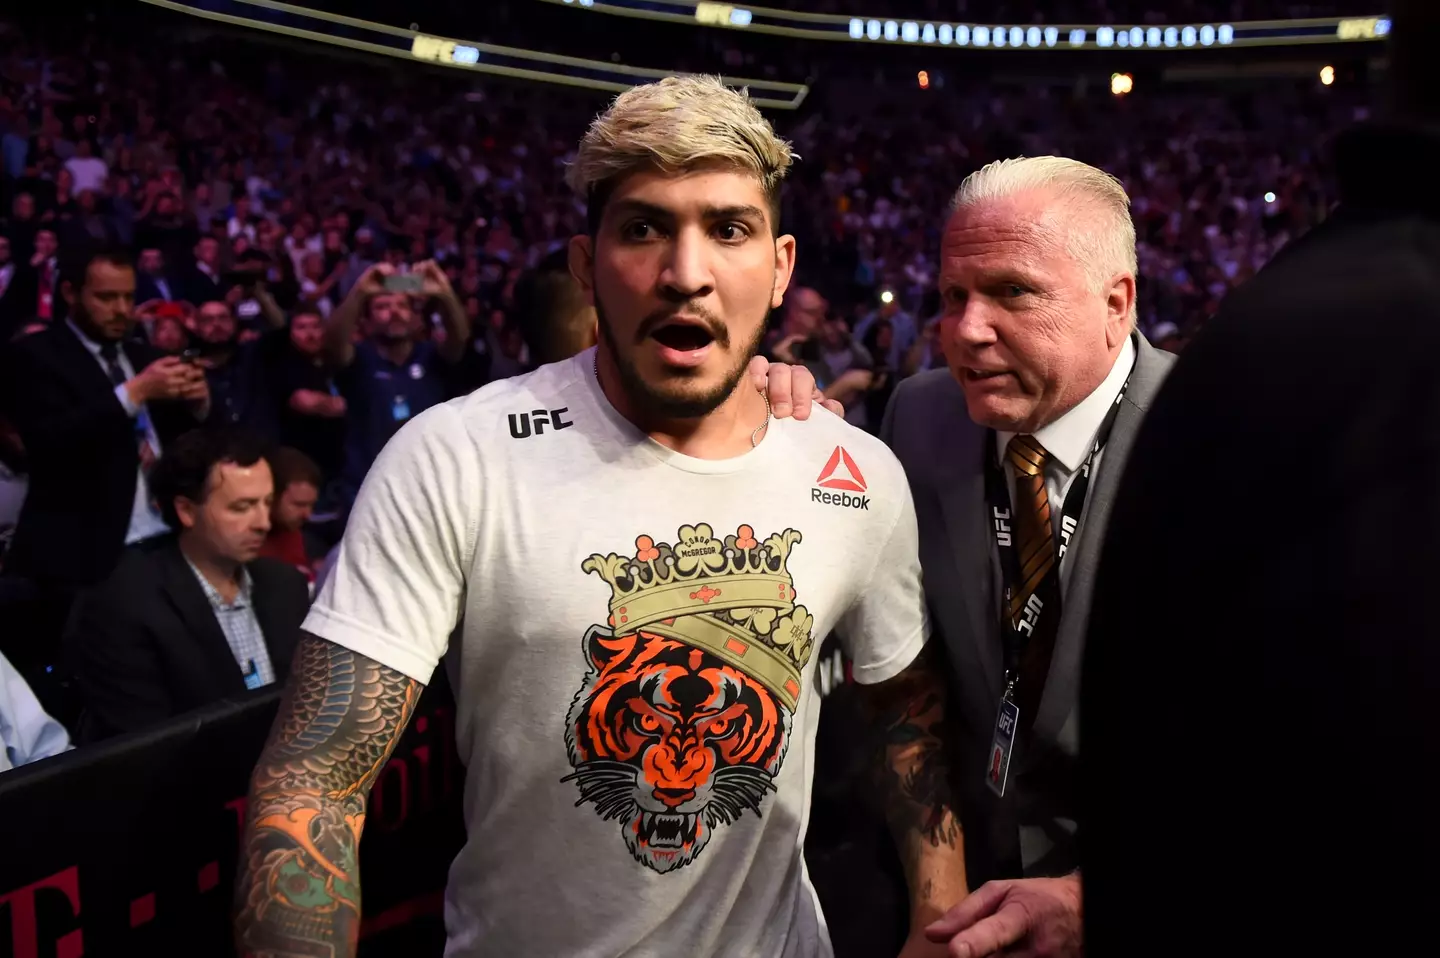 Dillon Danis is known for his online trolling of opponents.